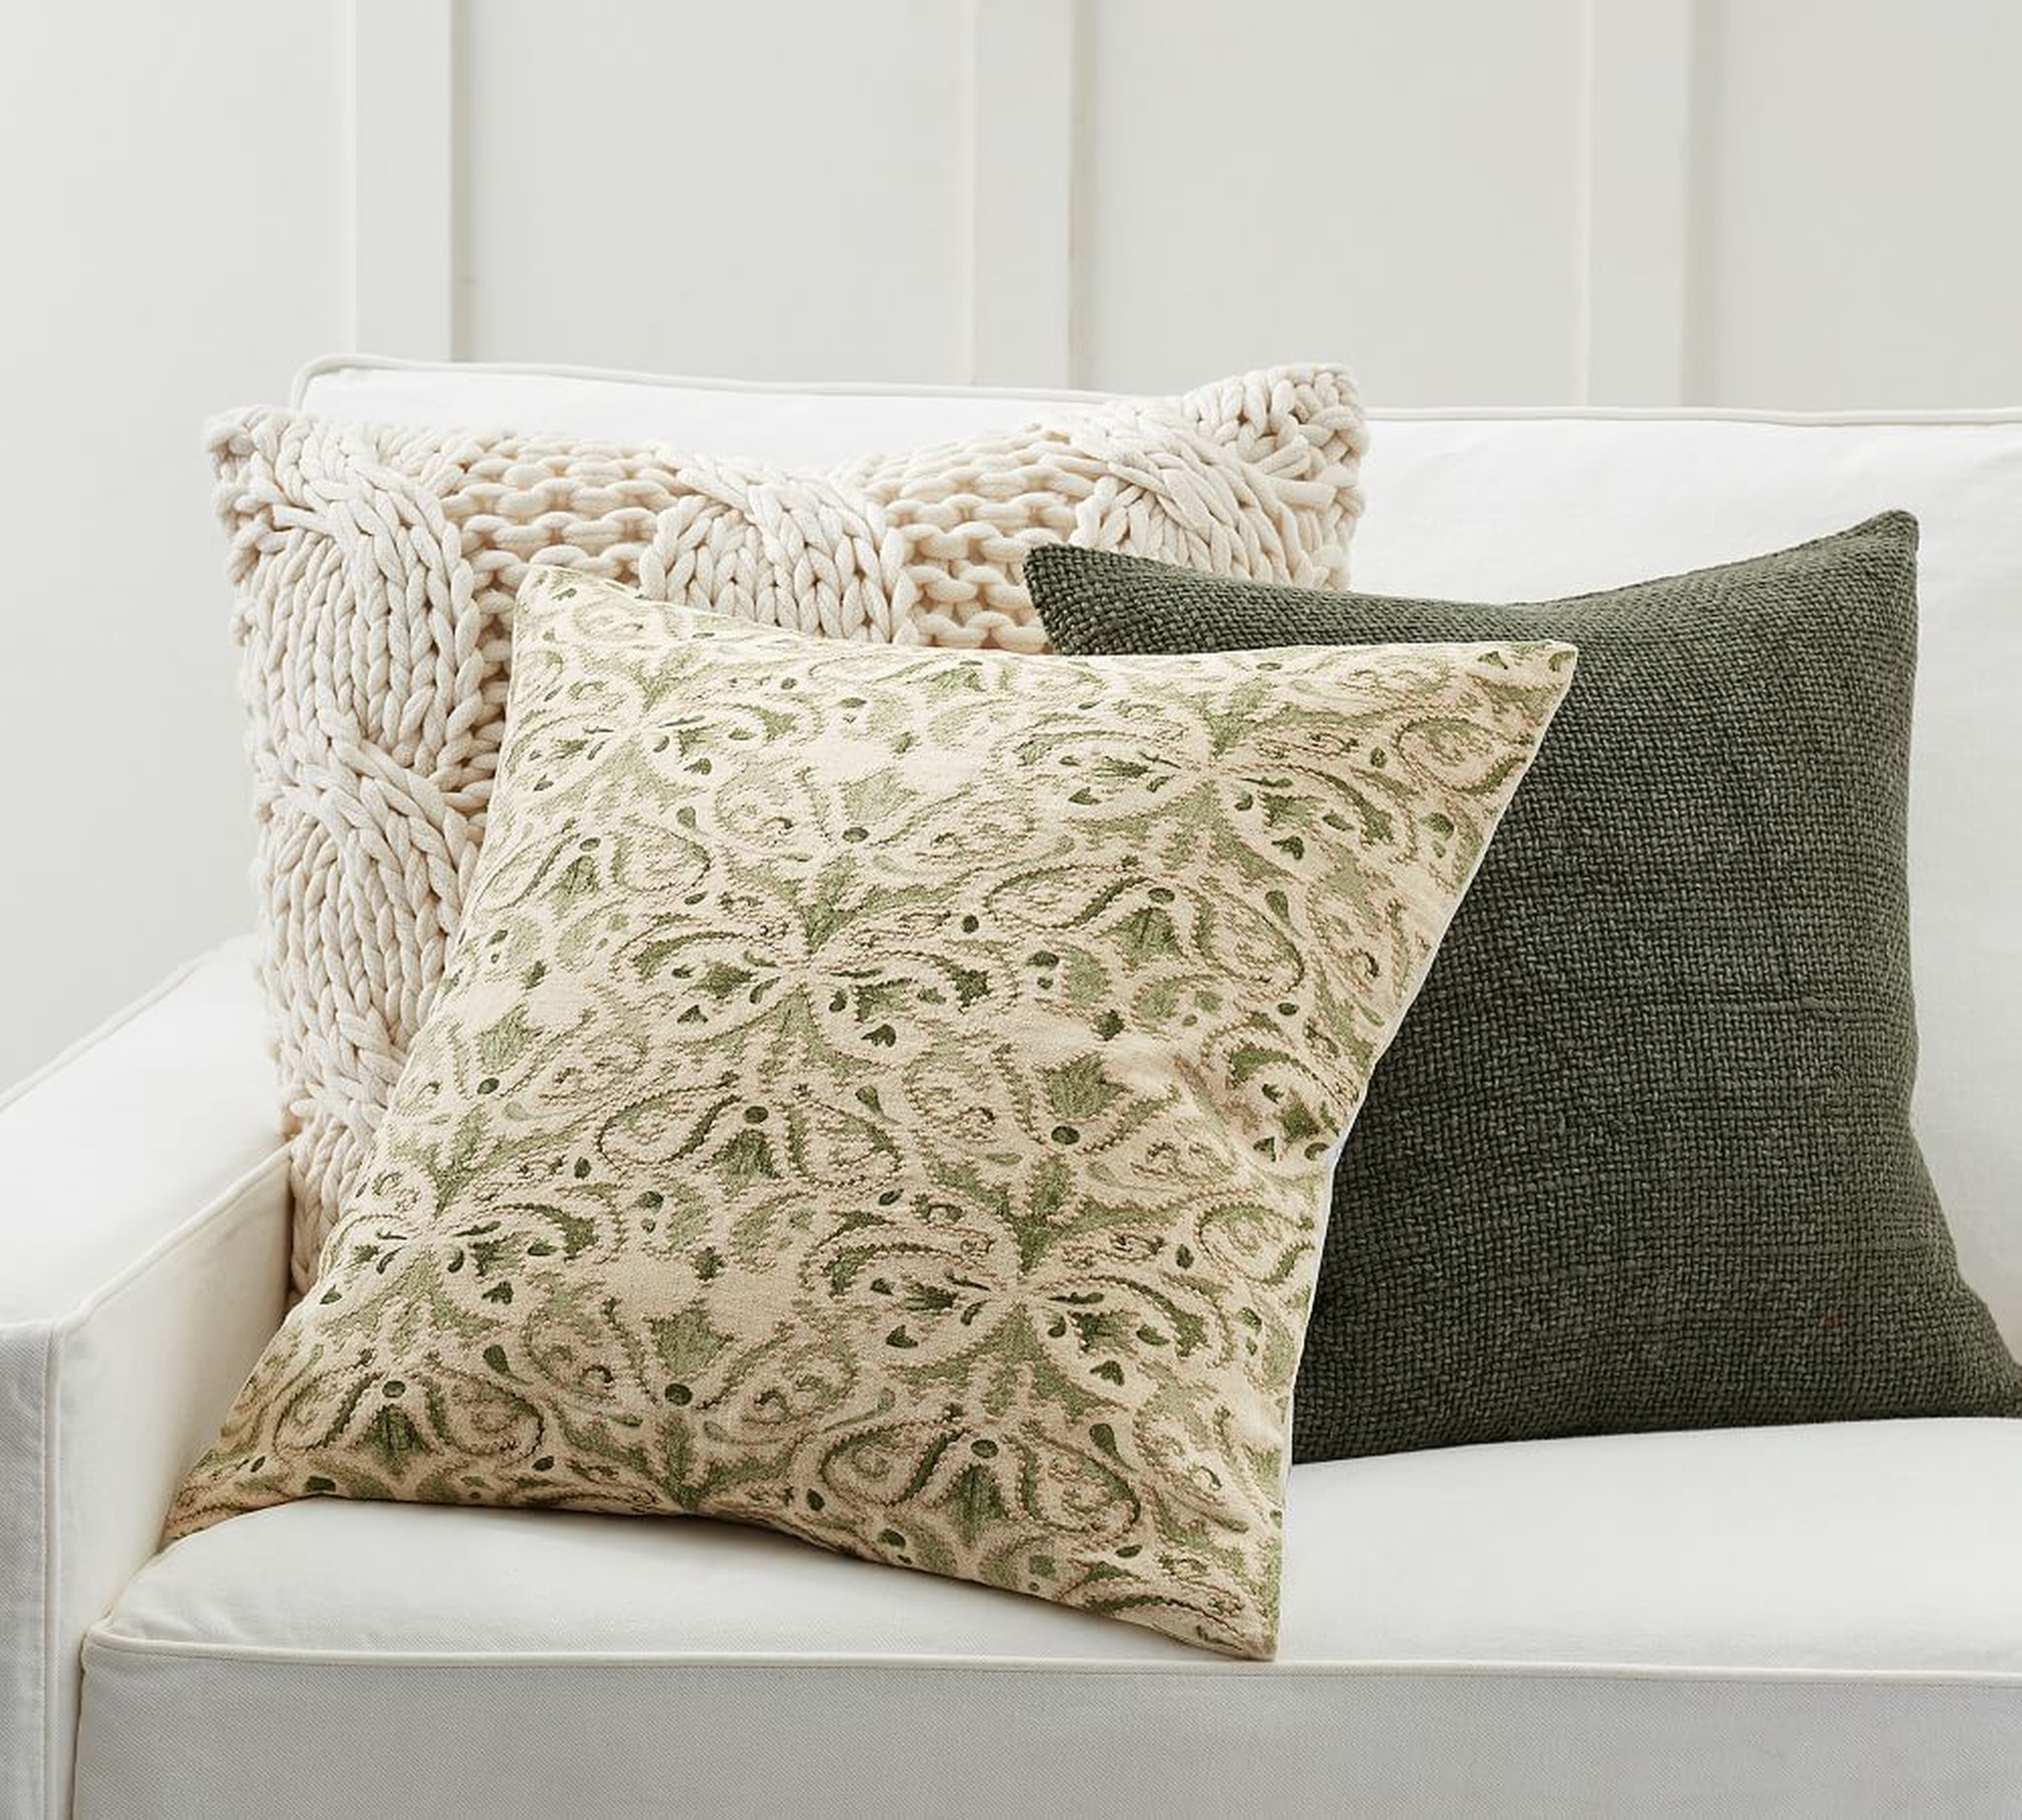 The Go-To Greens Pillow Cover Set - Pottery Barn